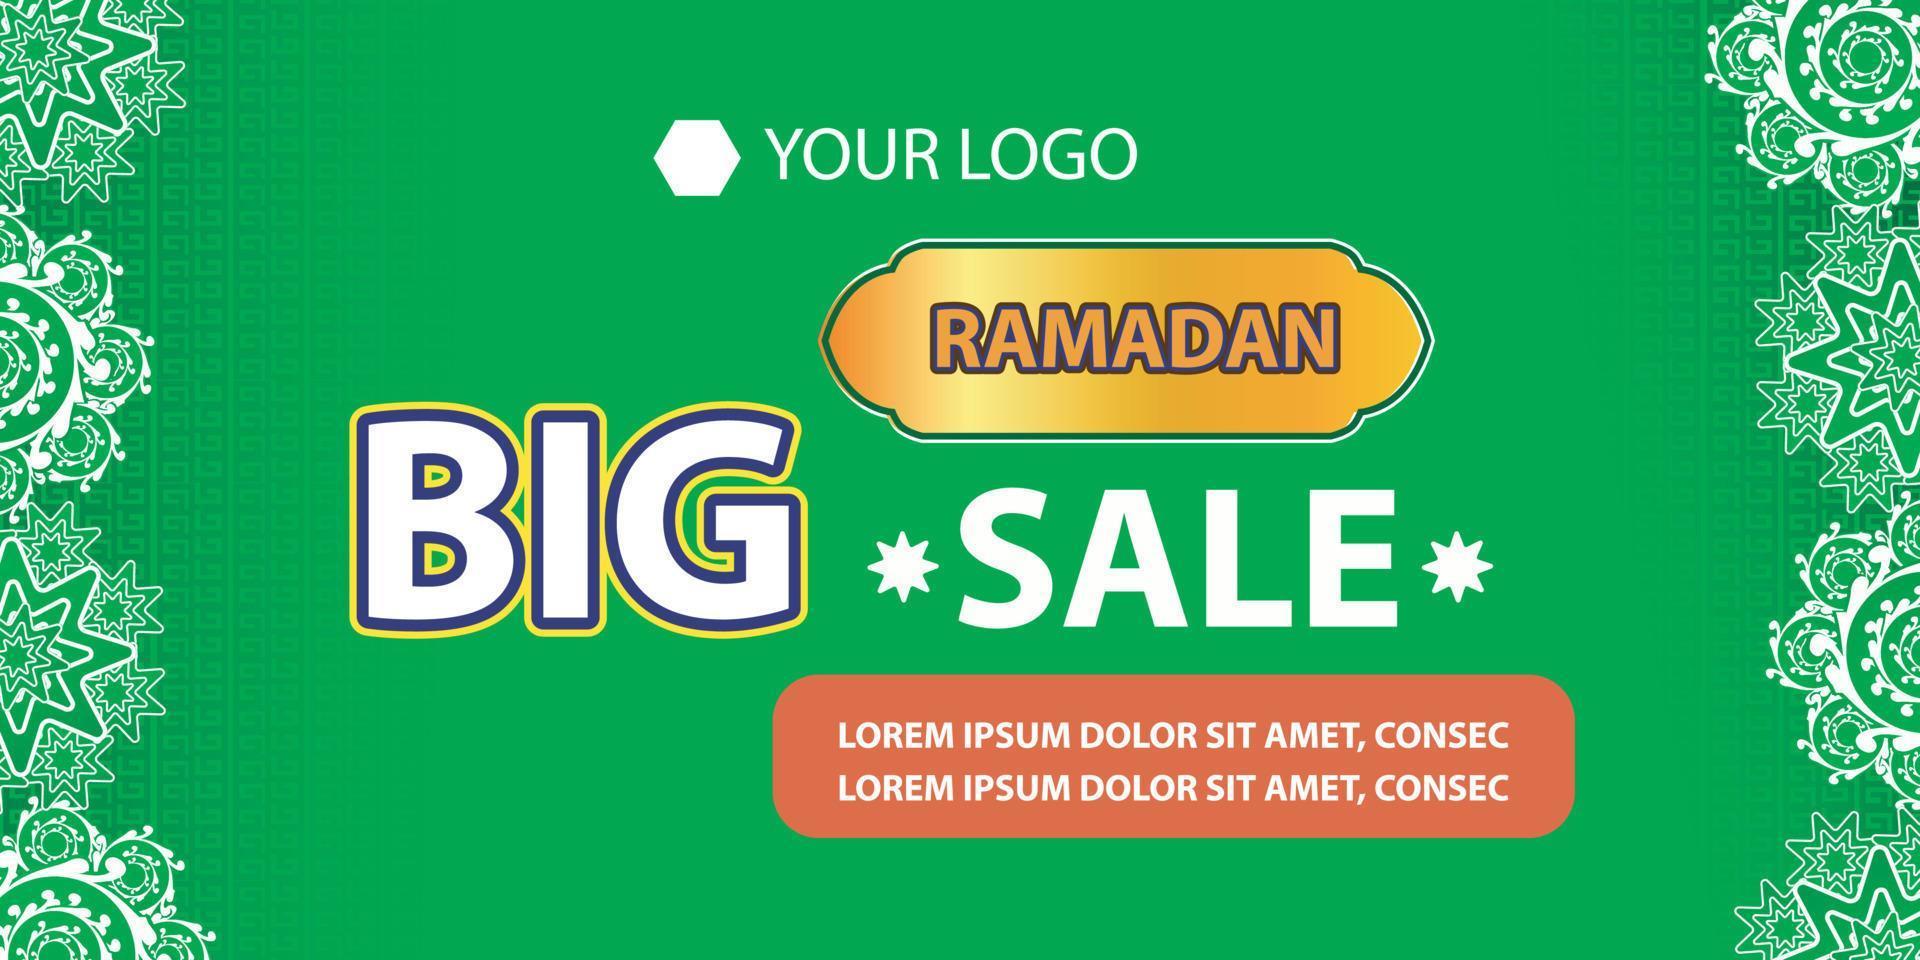 Ramadan Kareem Mega Sale Banner, Islamic Ornament Lantern, Decoration gold and modern Background with empty space for photo vector